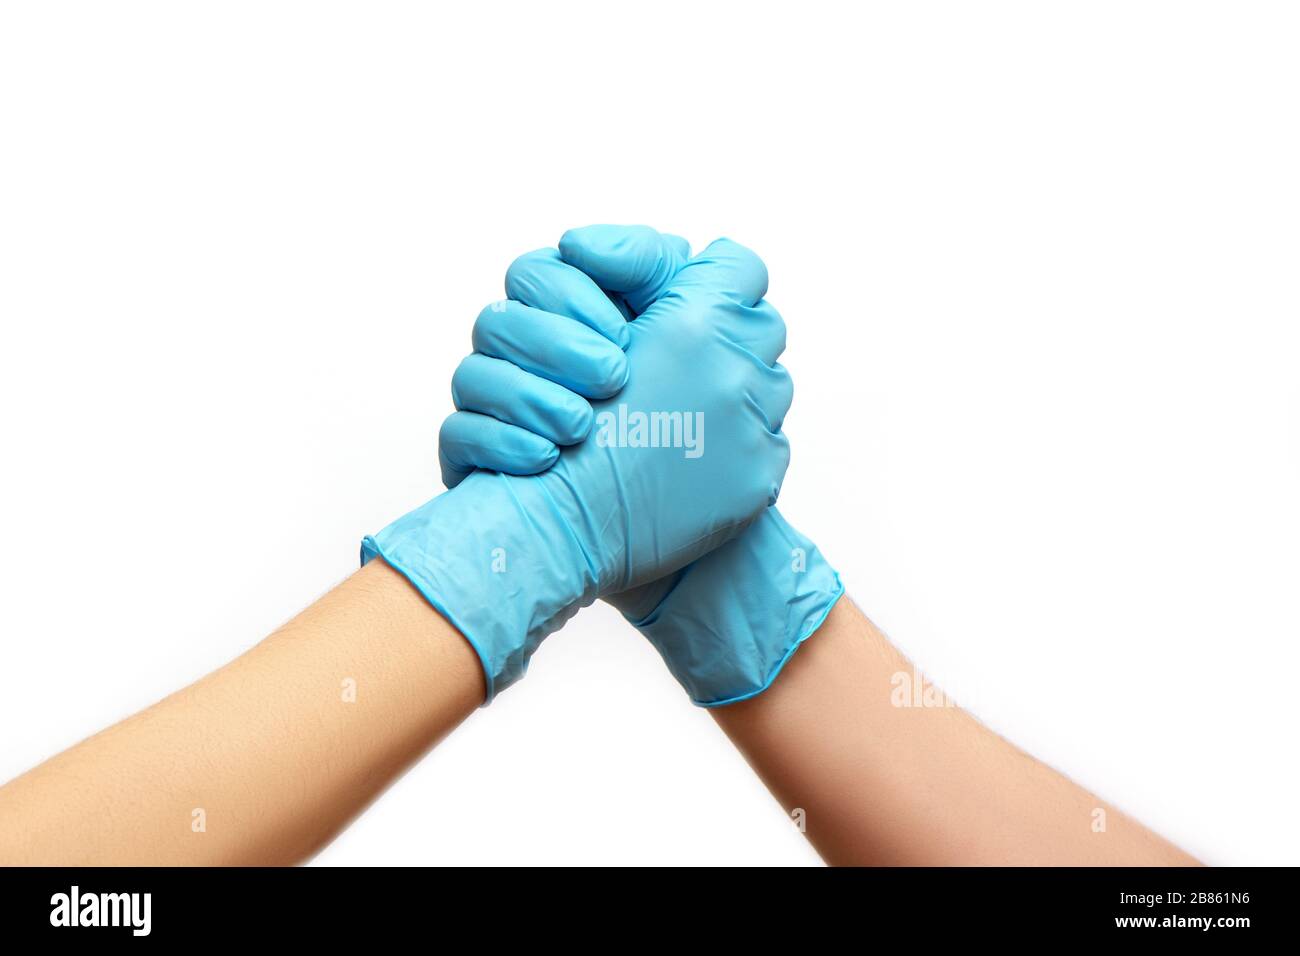 Hands of friends in medical gloves greeting each other isolated on white background. Stock Photo